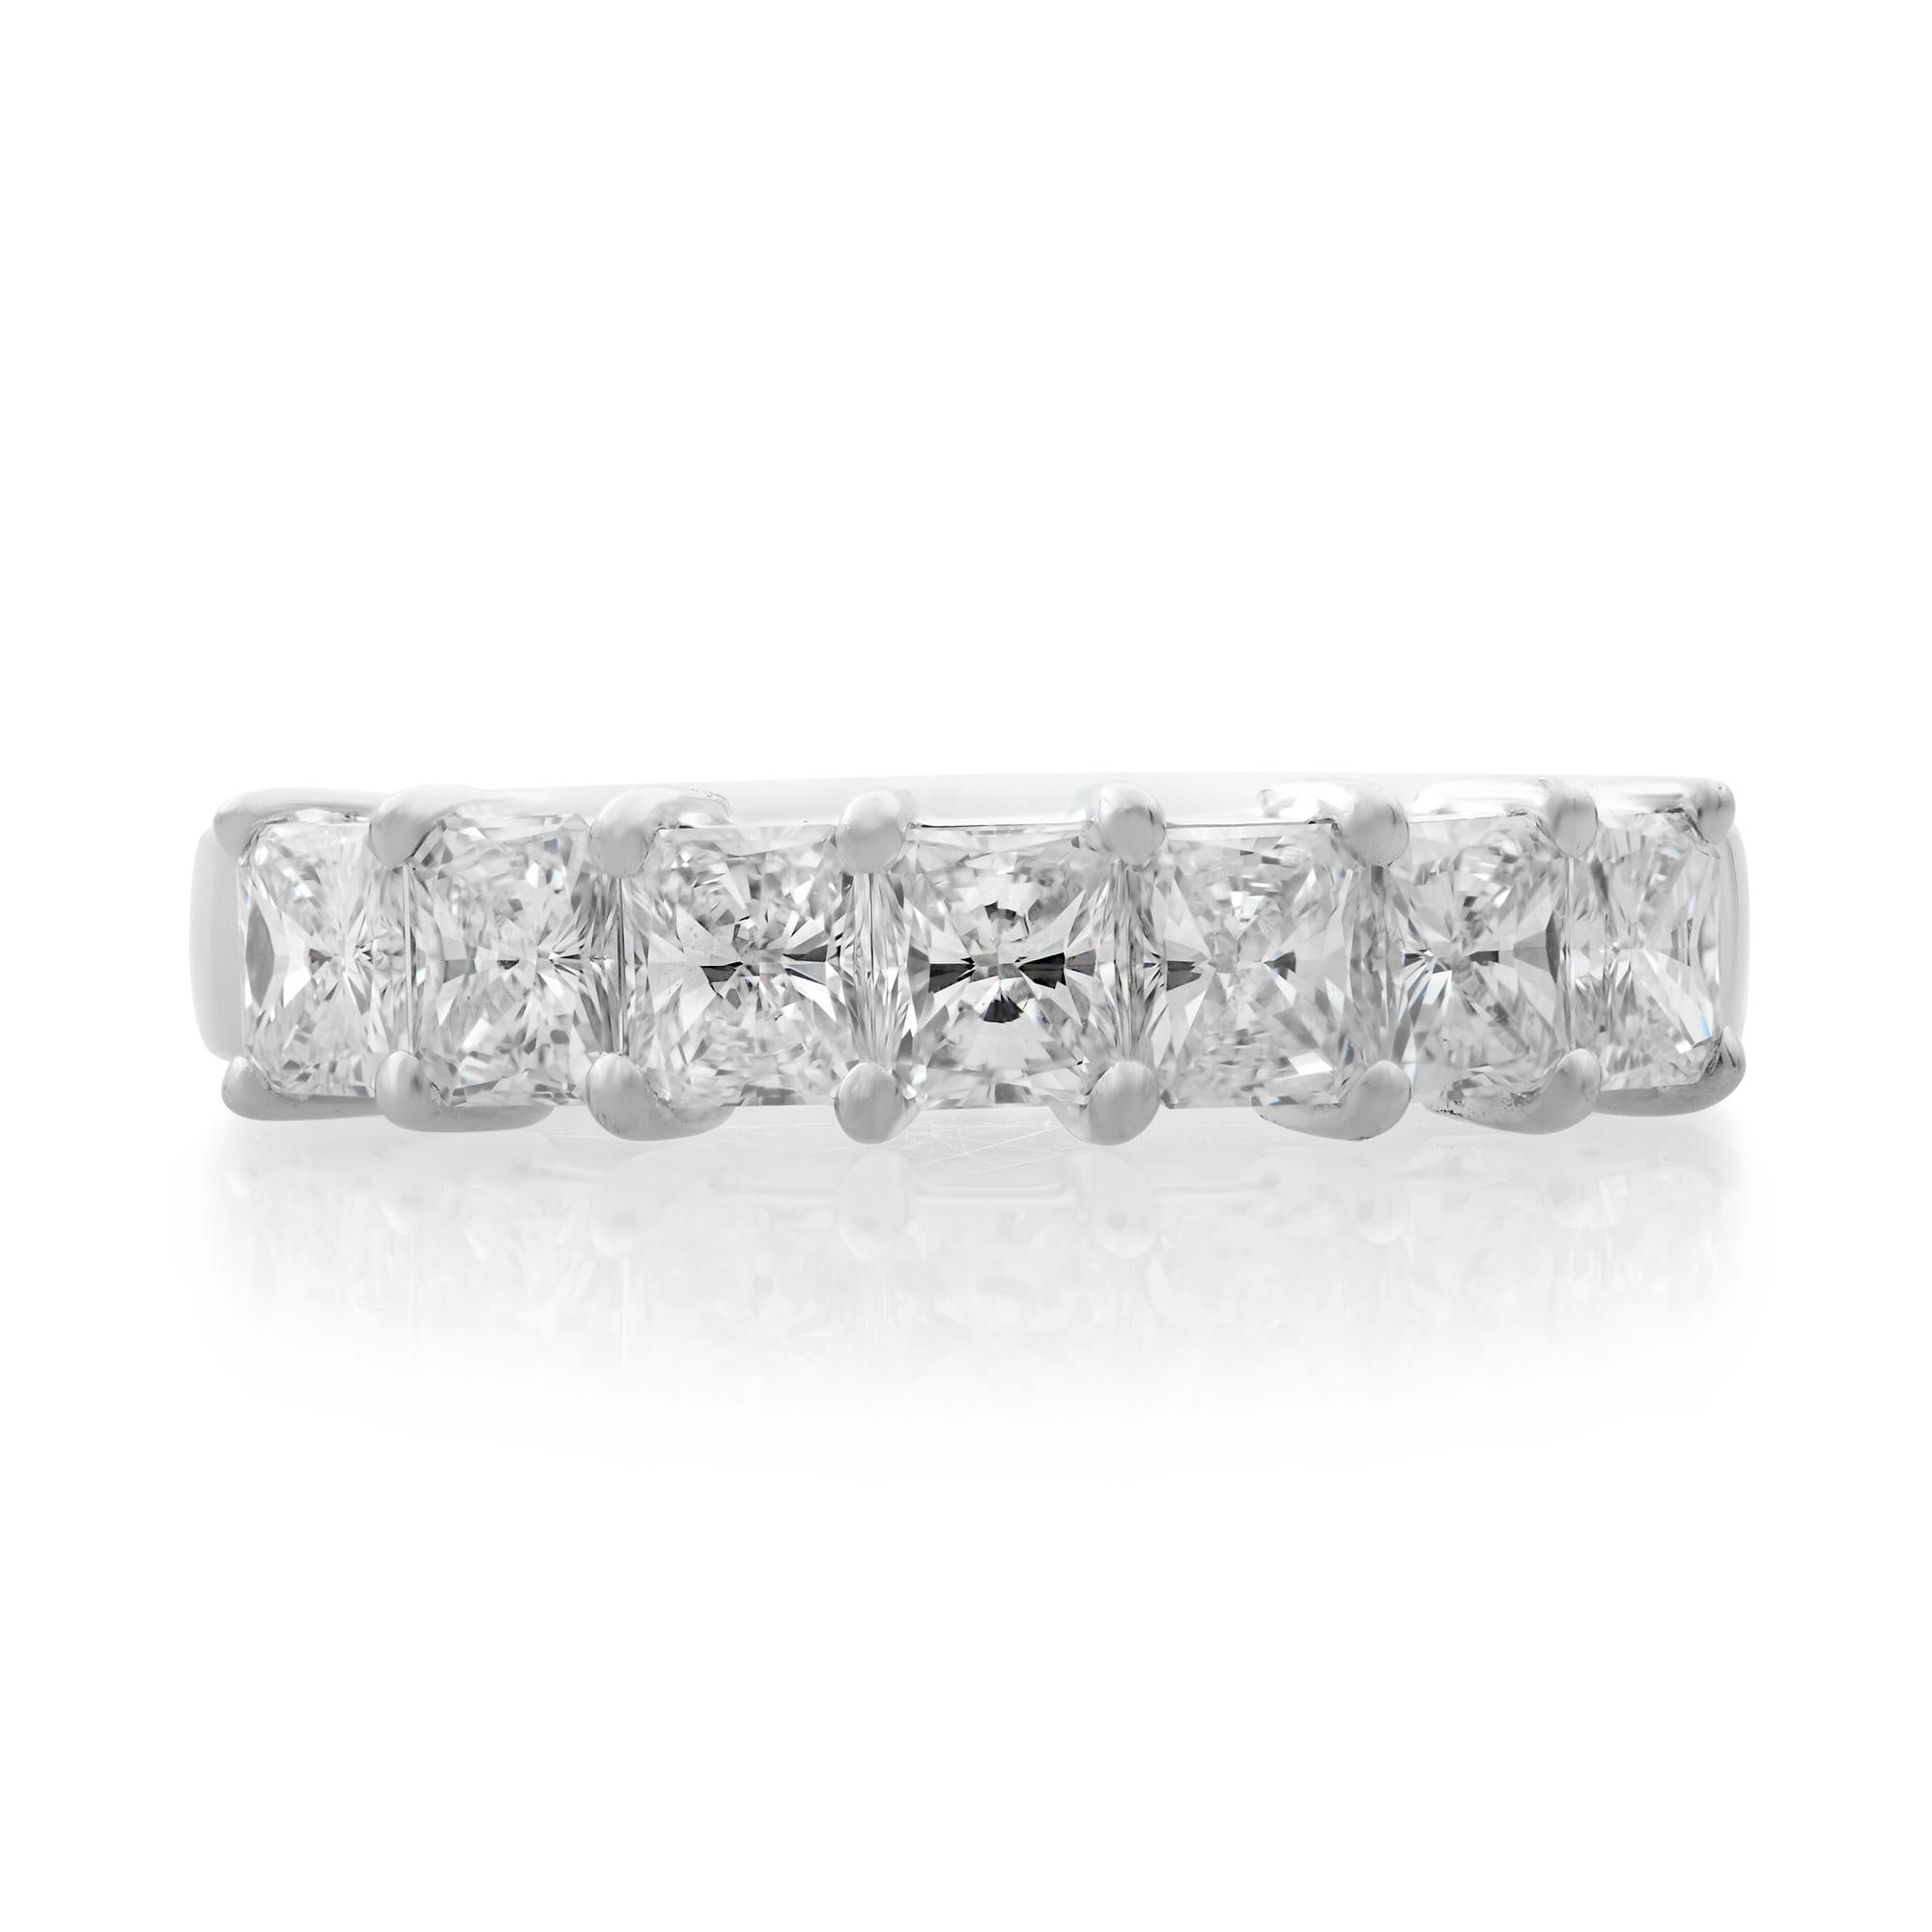 Crafted in 14k white gold, this semi eternity diamond wedding band features seven prong set princess cut diamonds across a glistening metal band. The diamonds shine brightly like stars in the night sky and are held in a prong setting for maximum